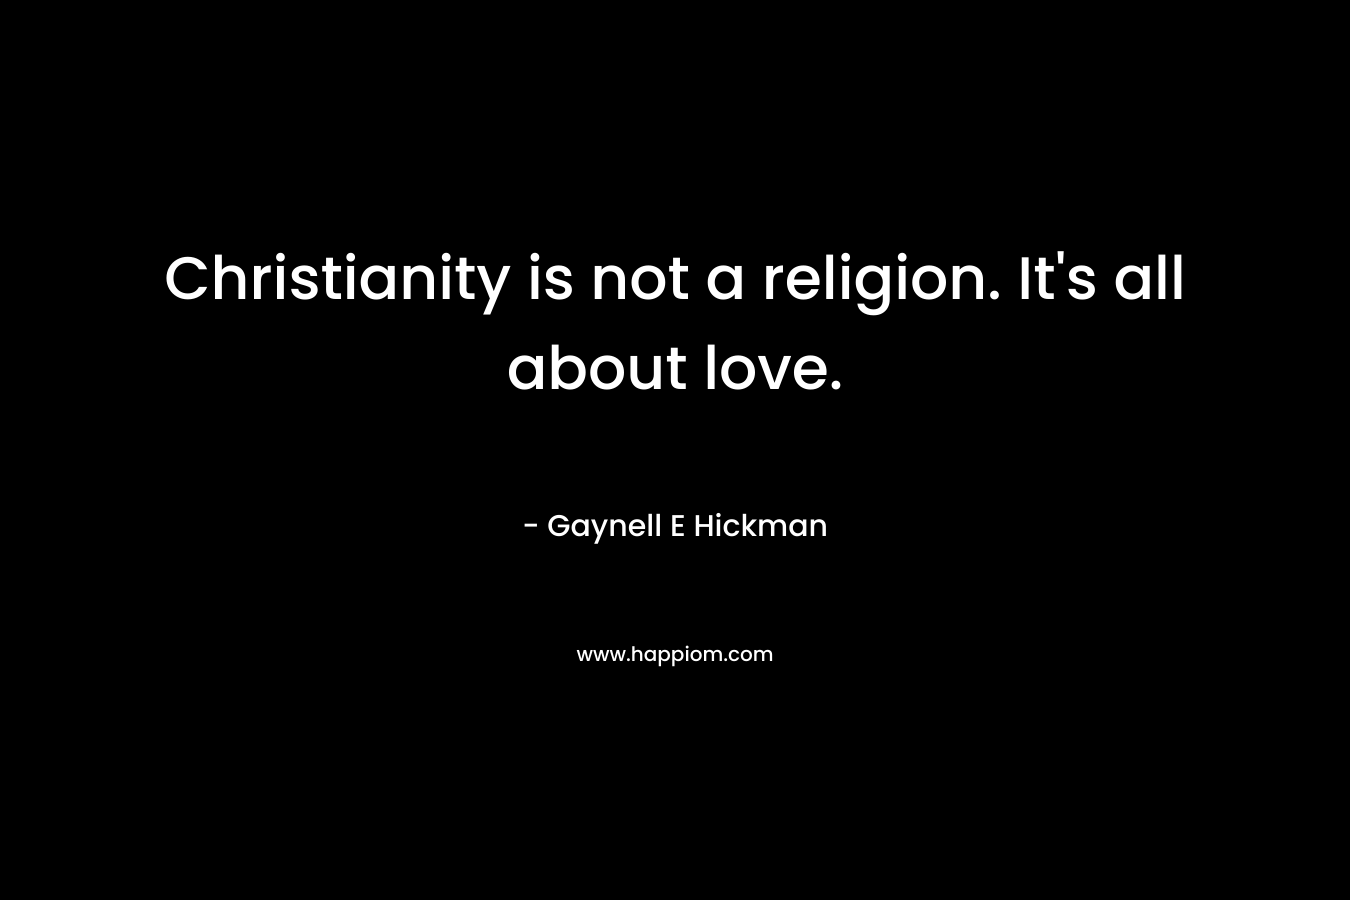 Christianity is not a religion. It's all about love.